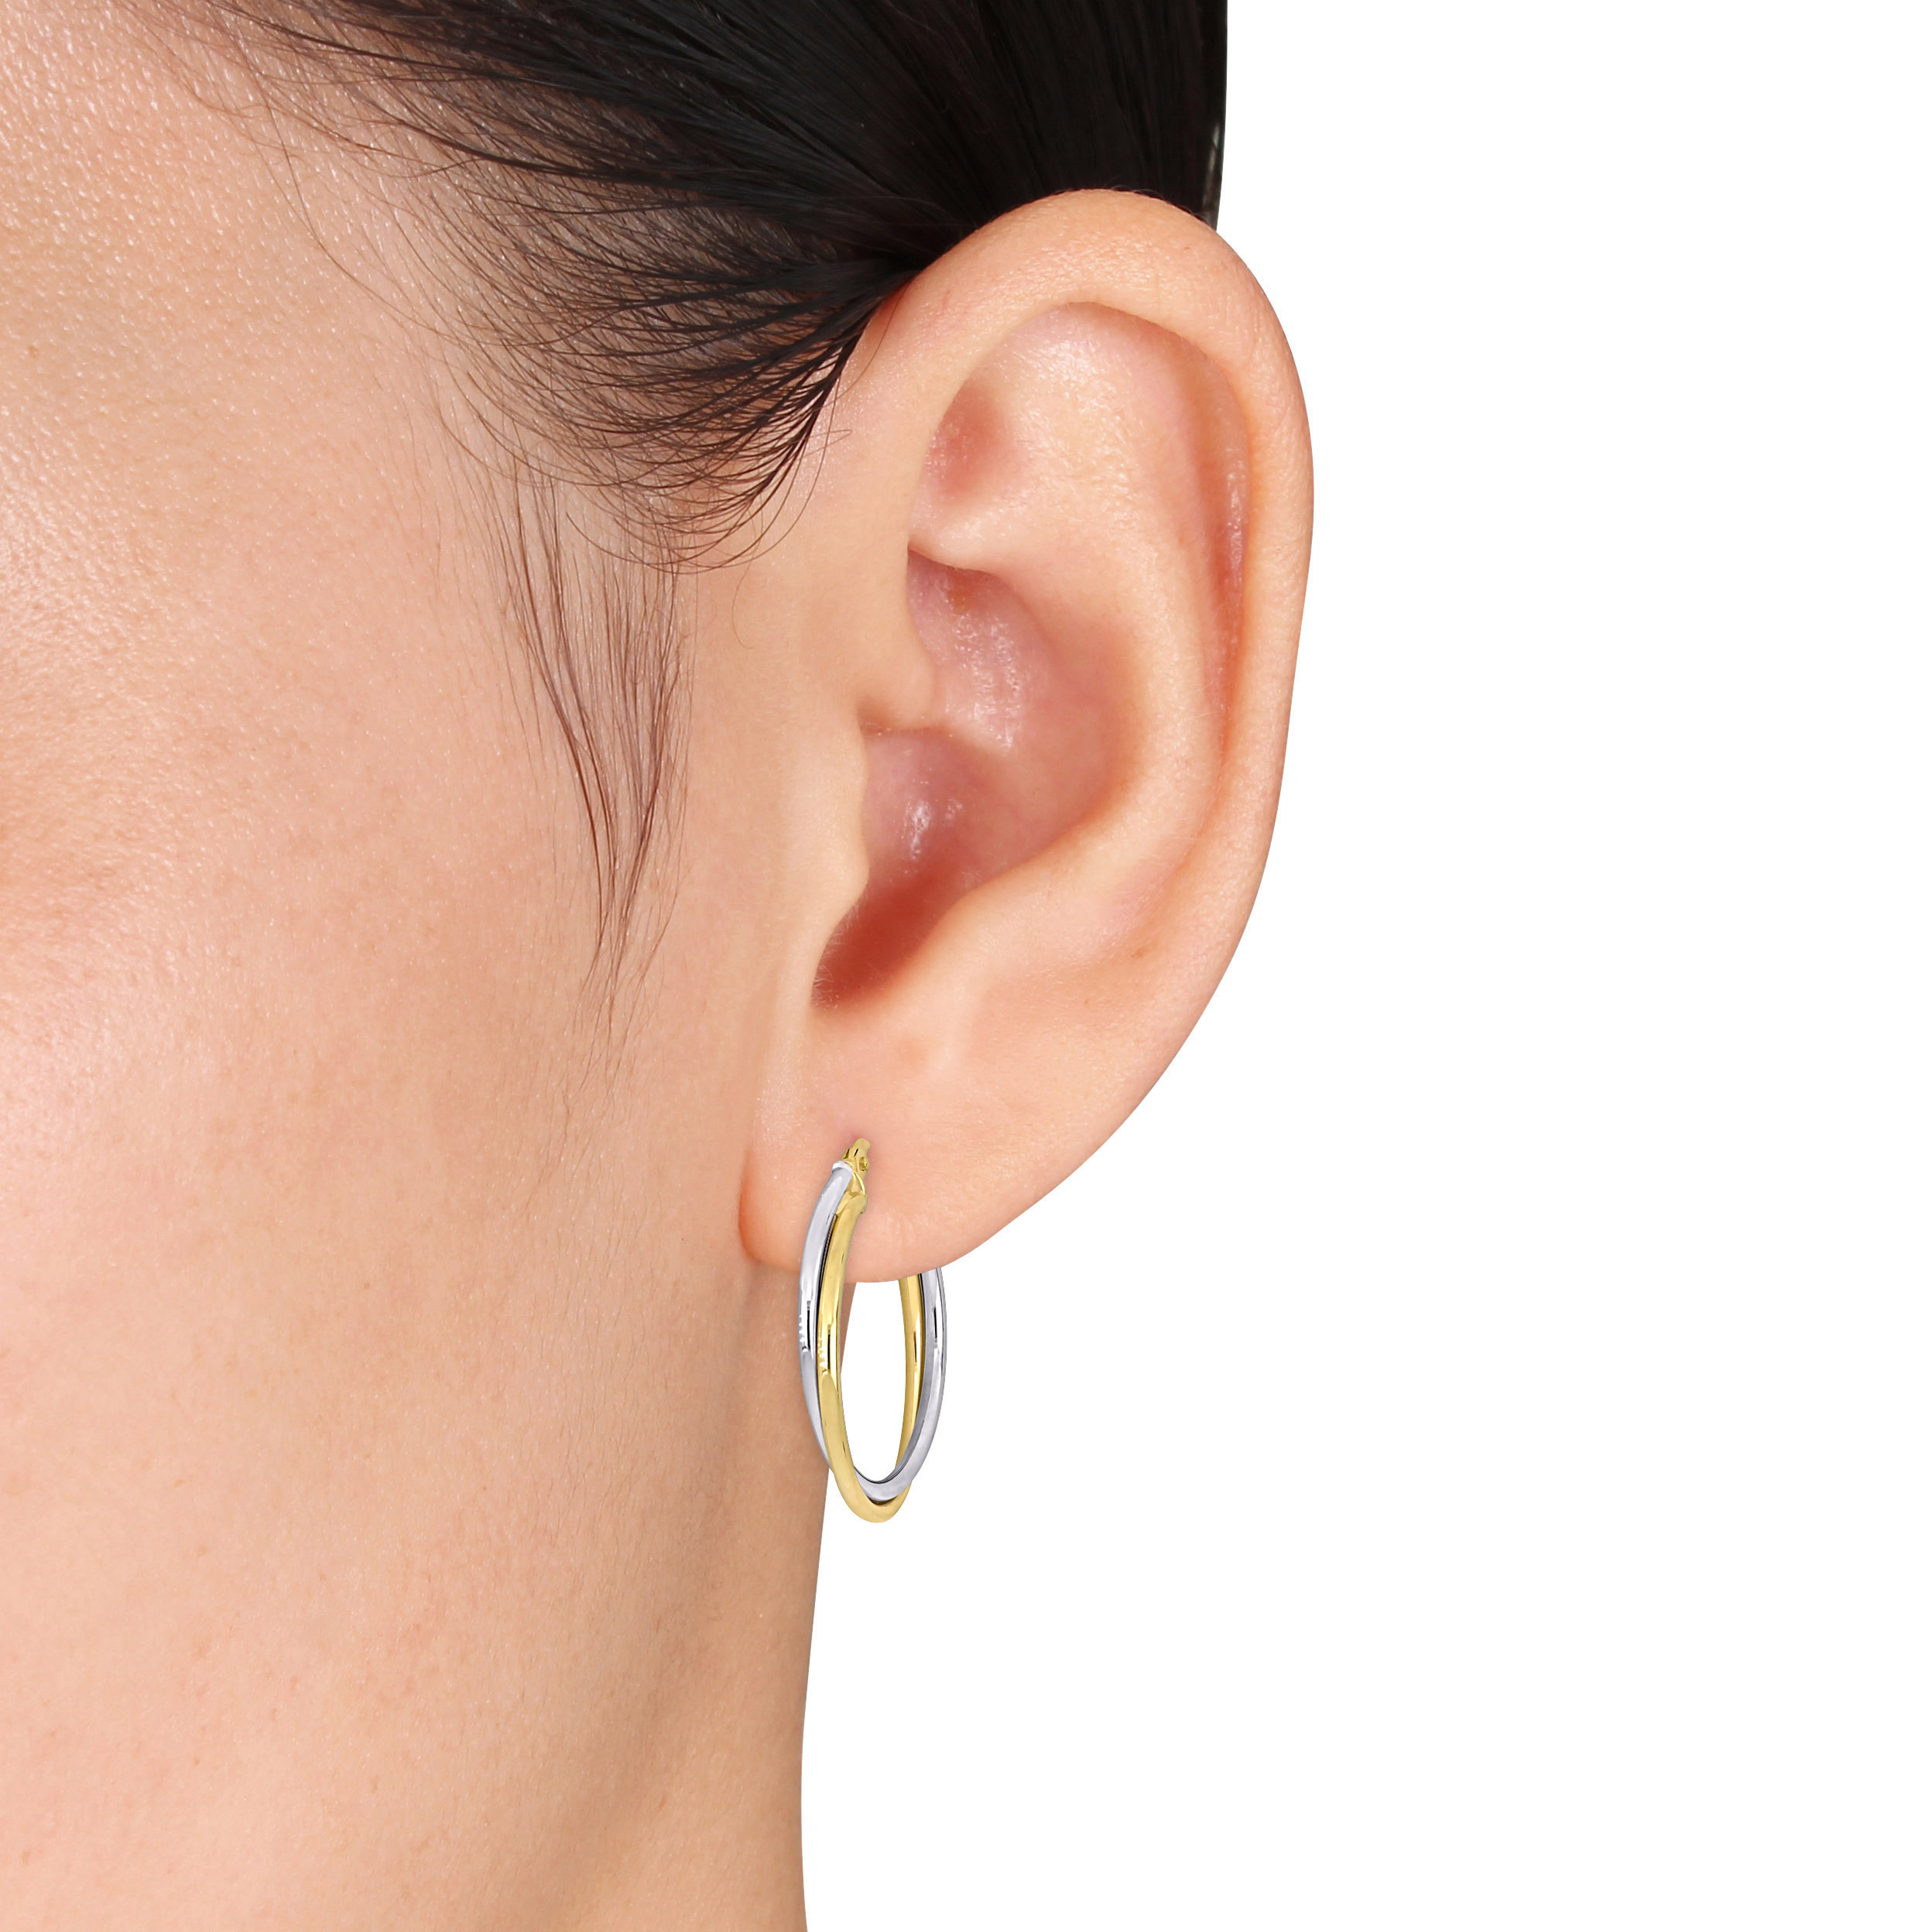 26 MM Crossover Hoop Earrings in 2-Tone 10k Yellow and White Gold